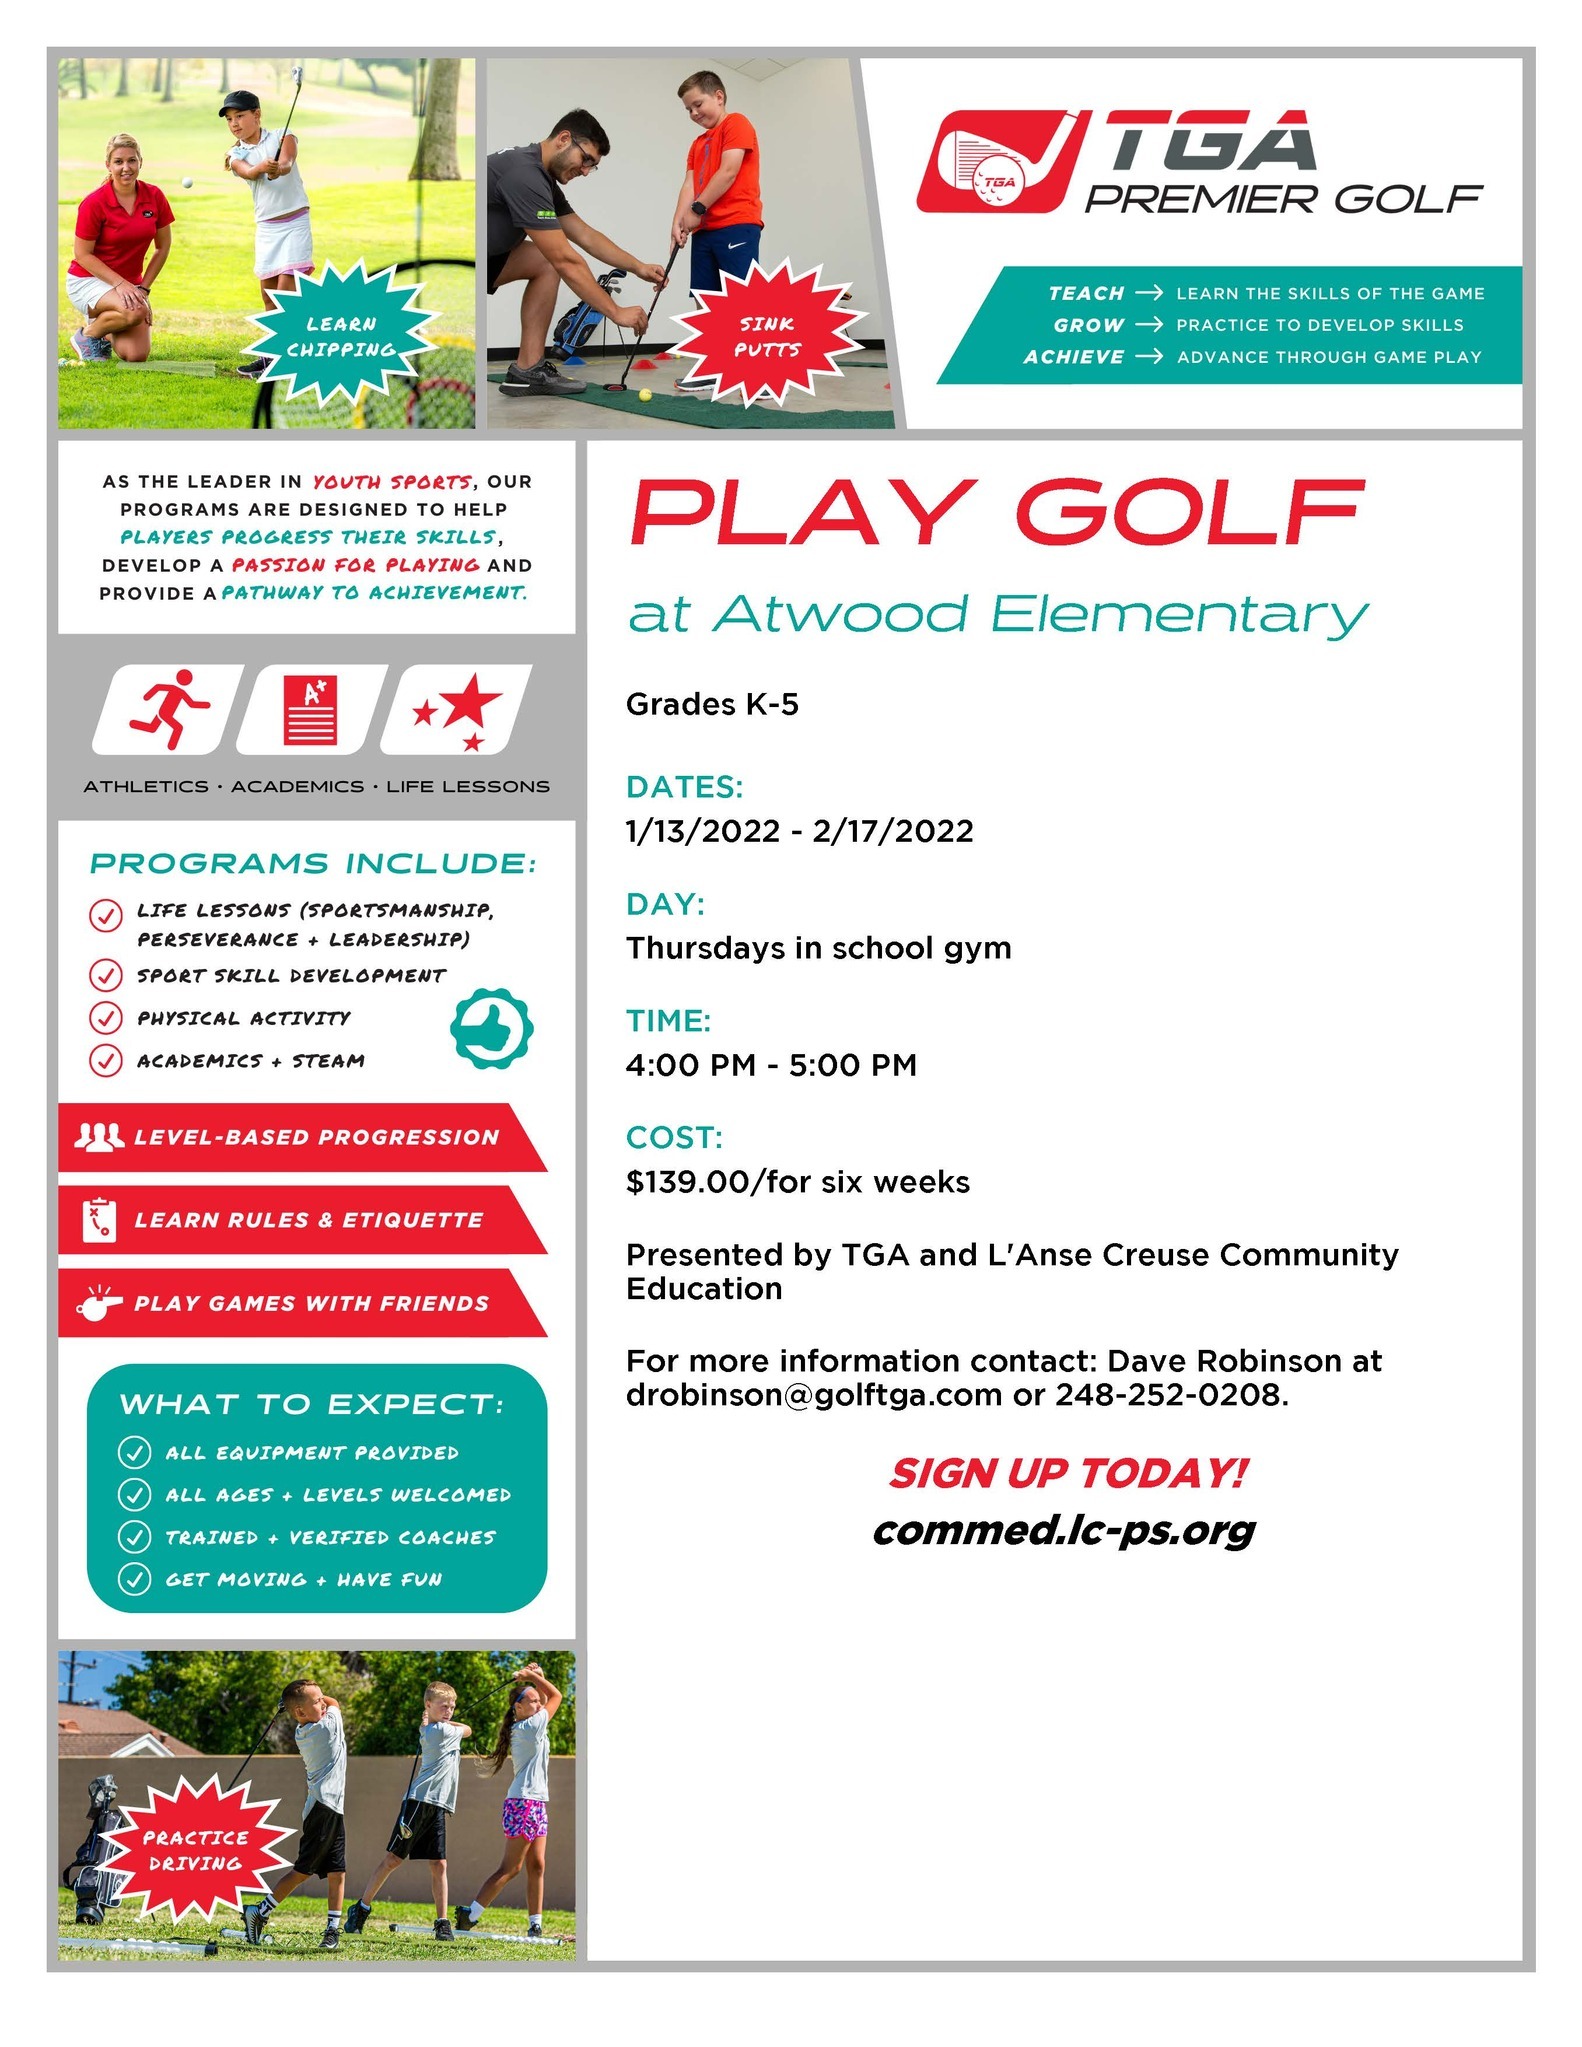 TGA Golf Flyer for Atwood